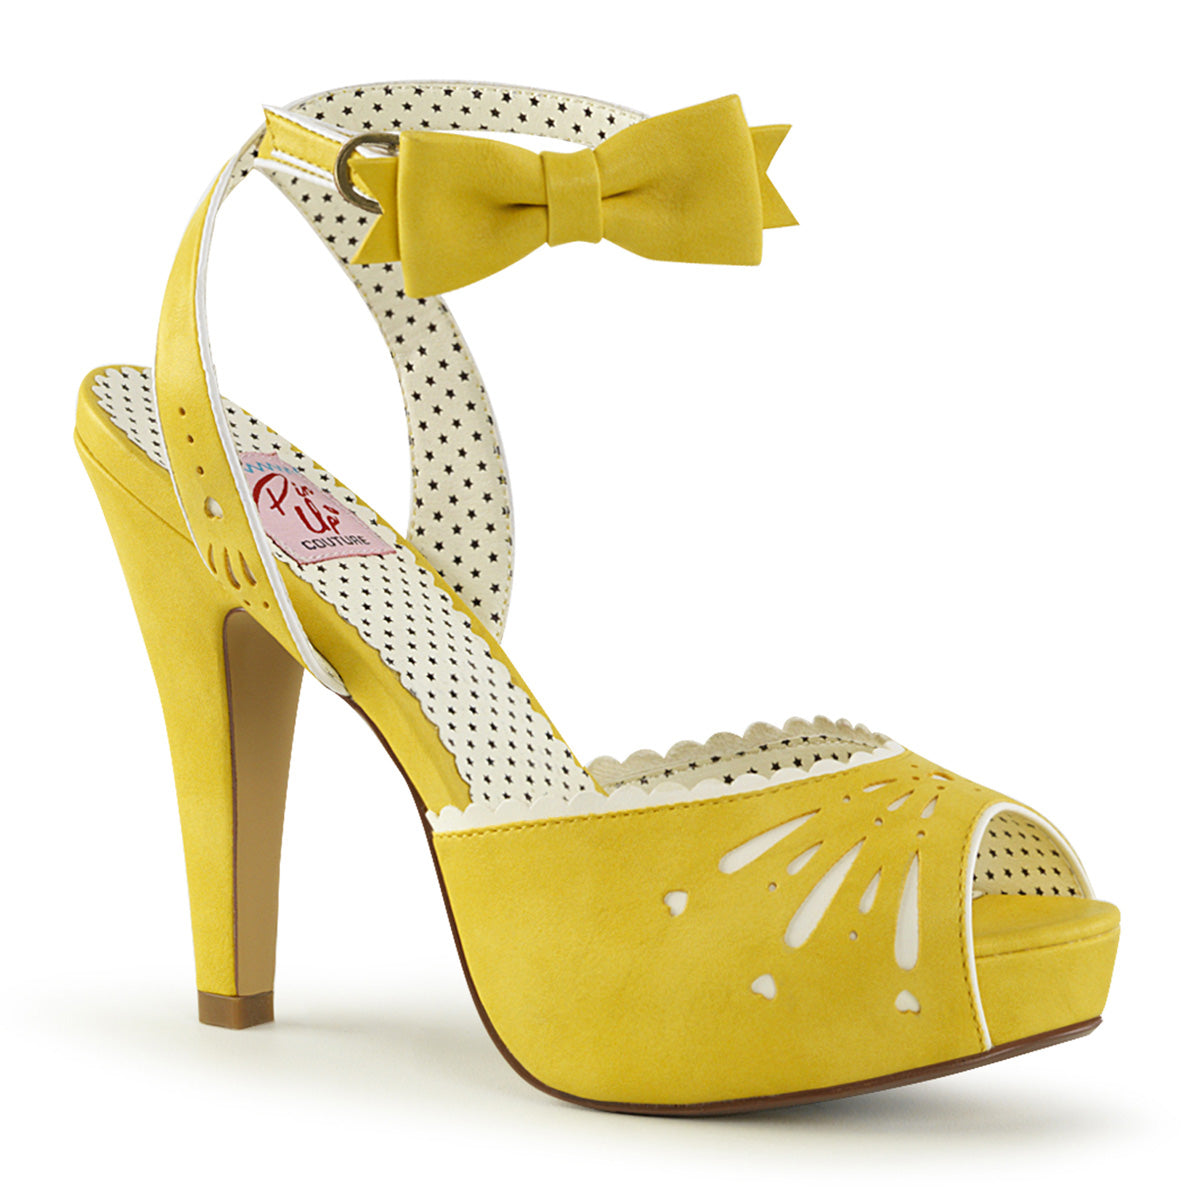 BETTIE-01 - Yellow Faux Leather